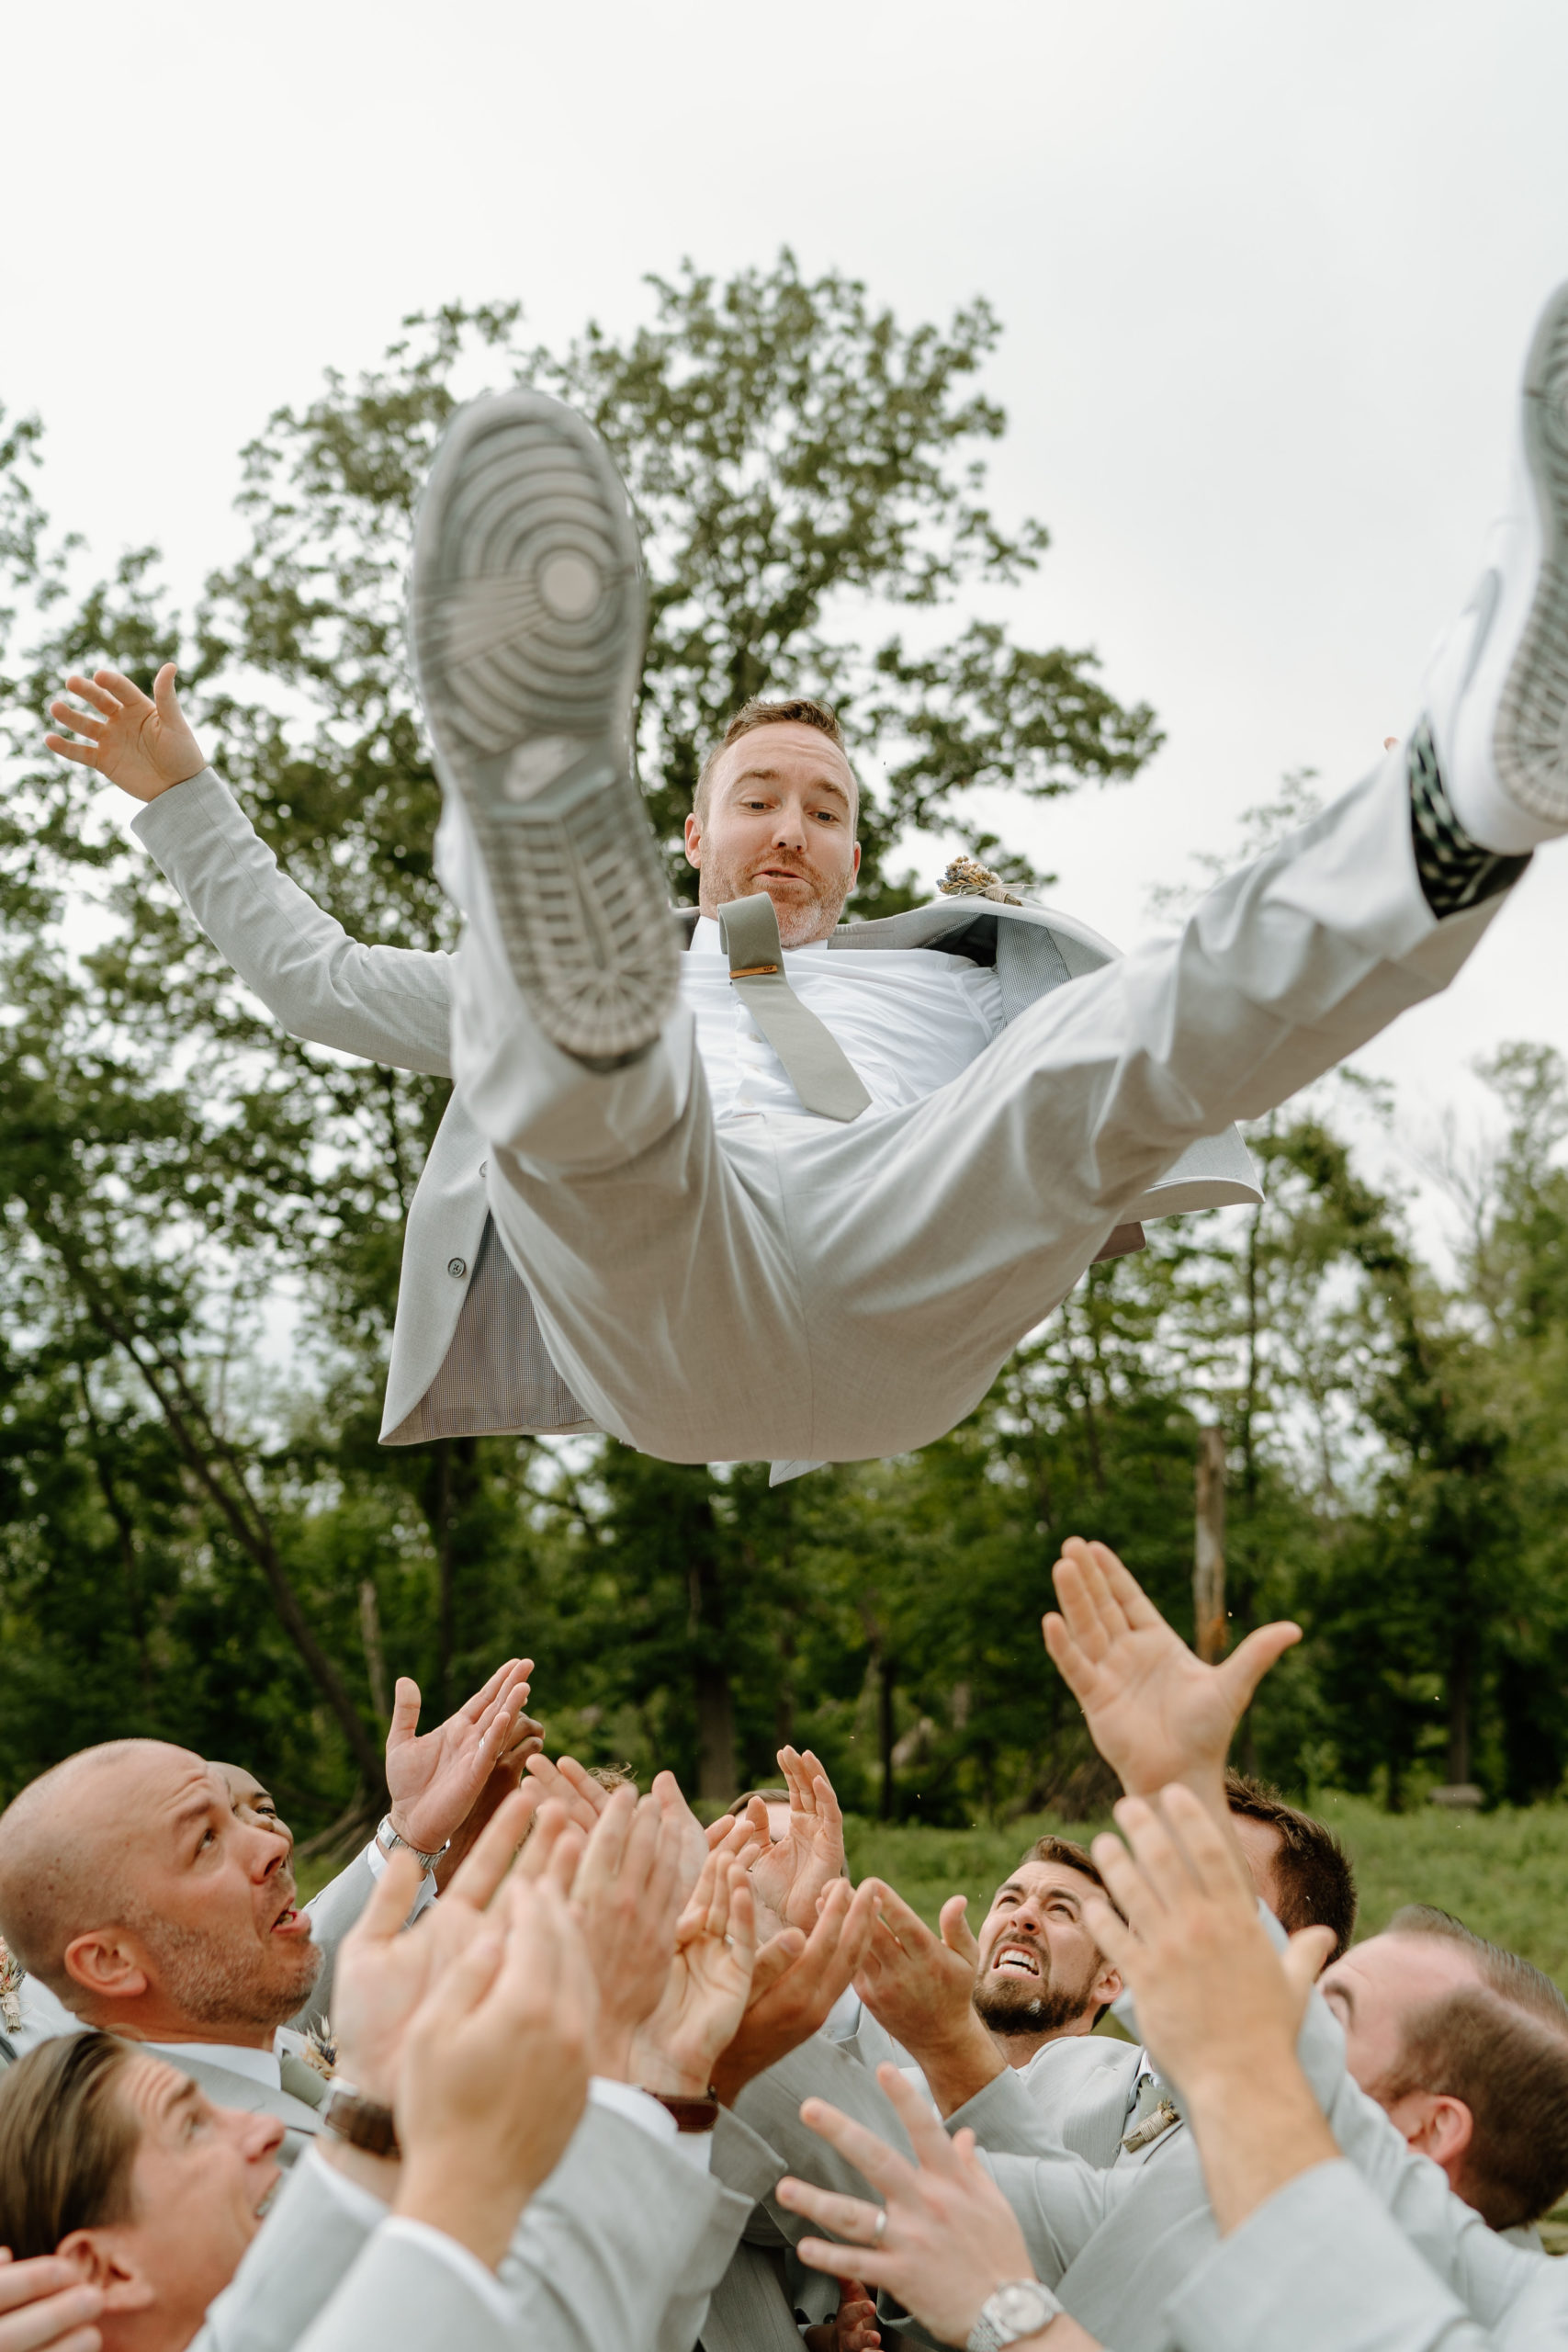 This is a groom being thrown in the air on his wedding day